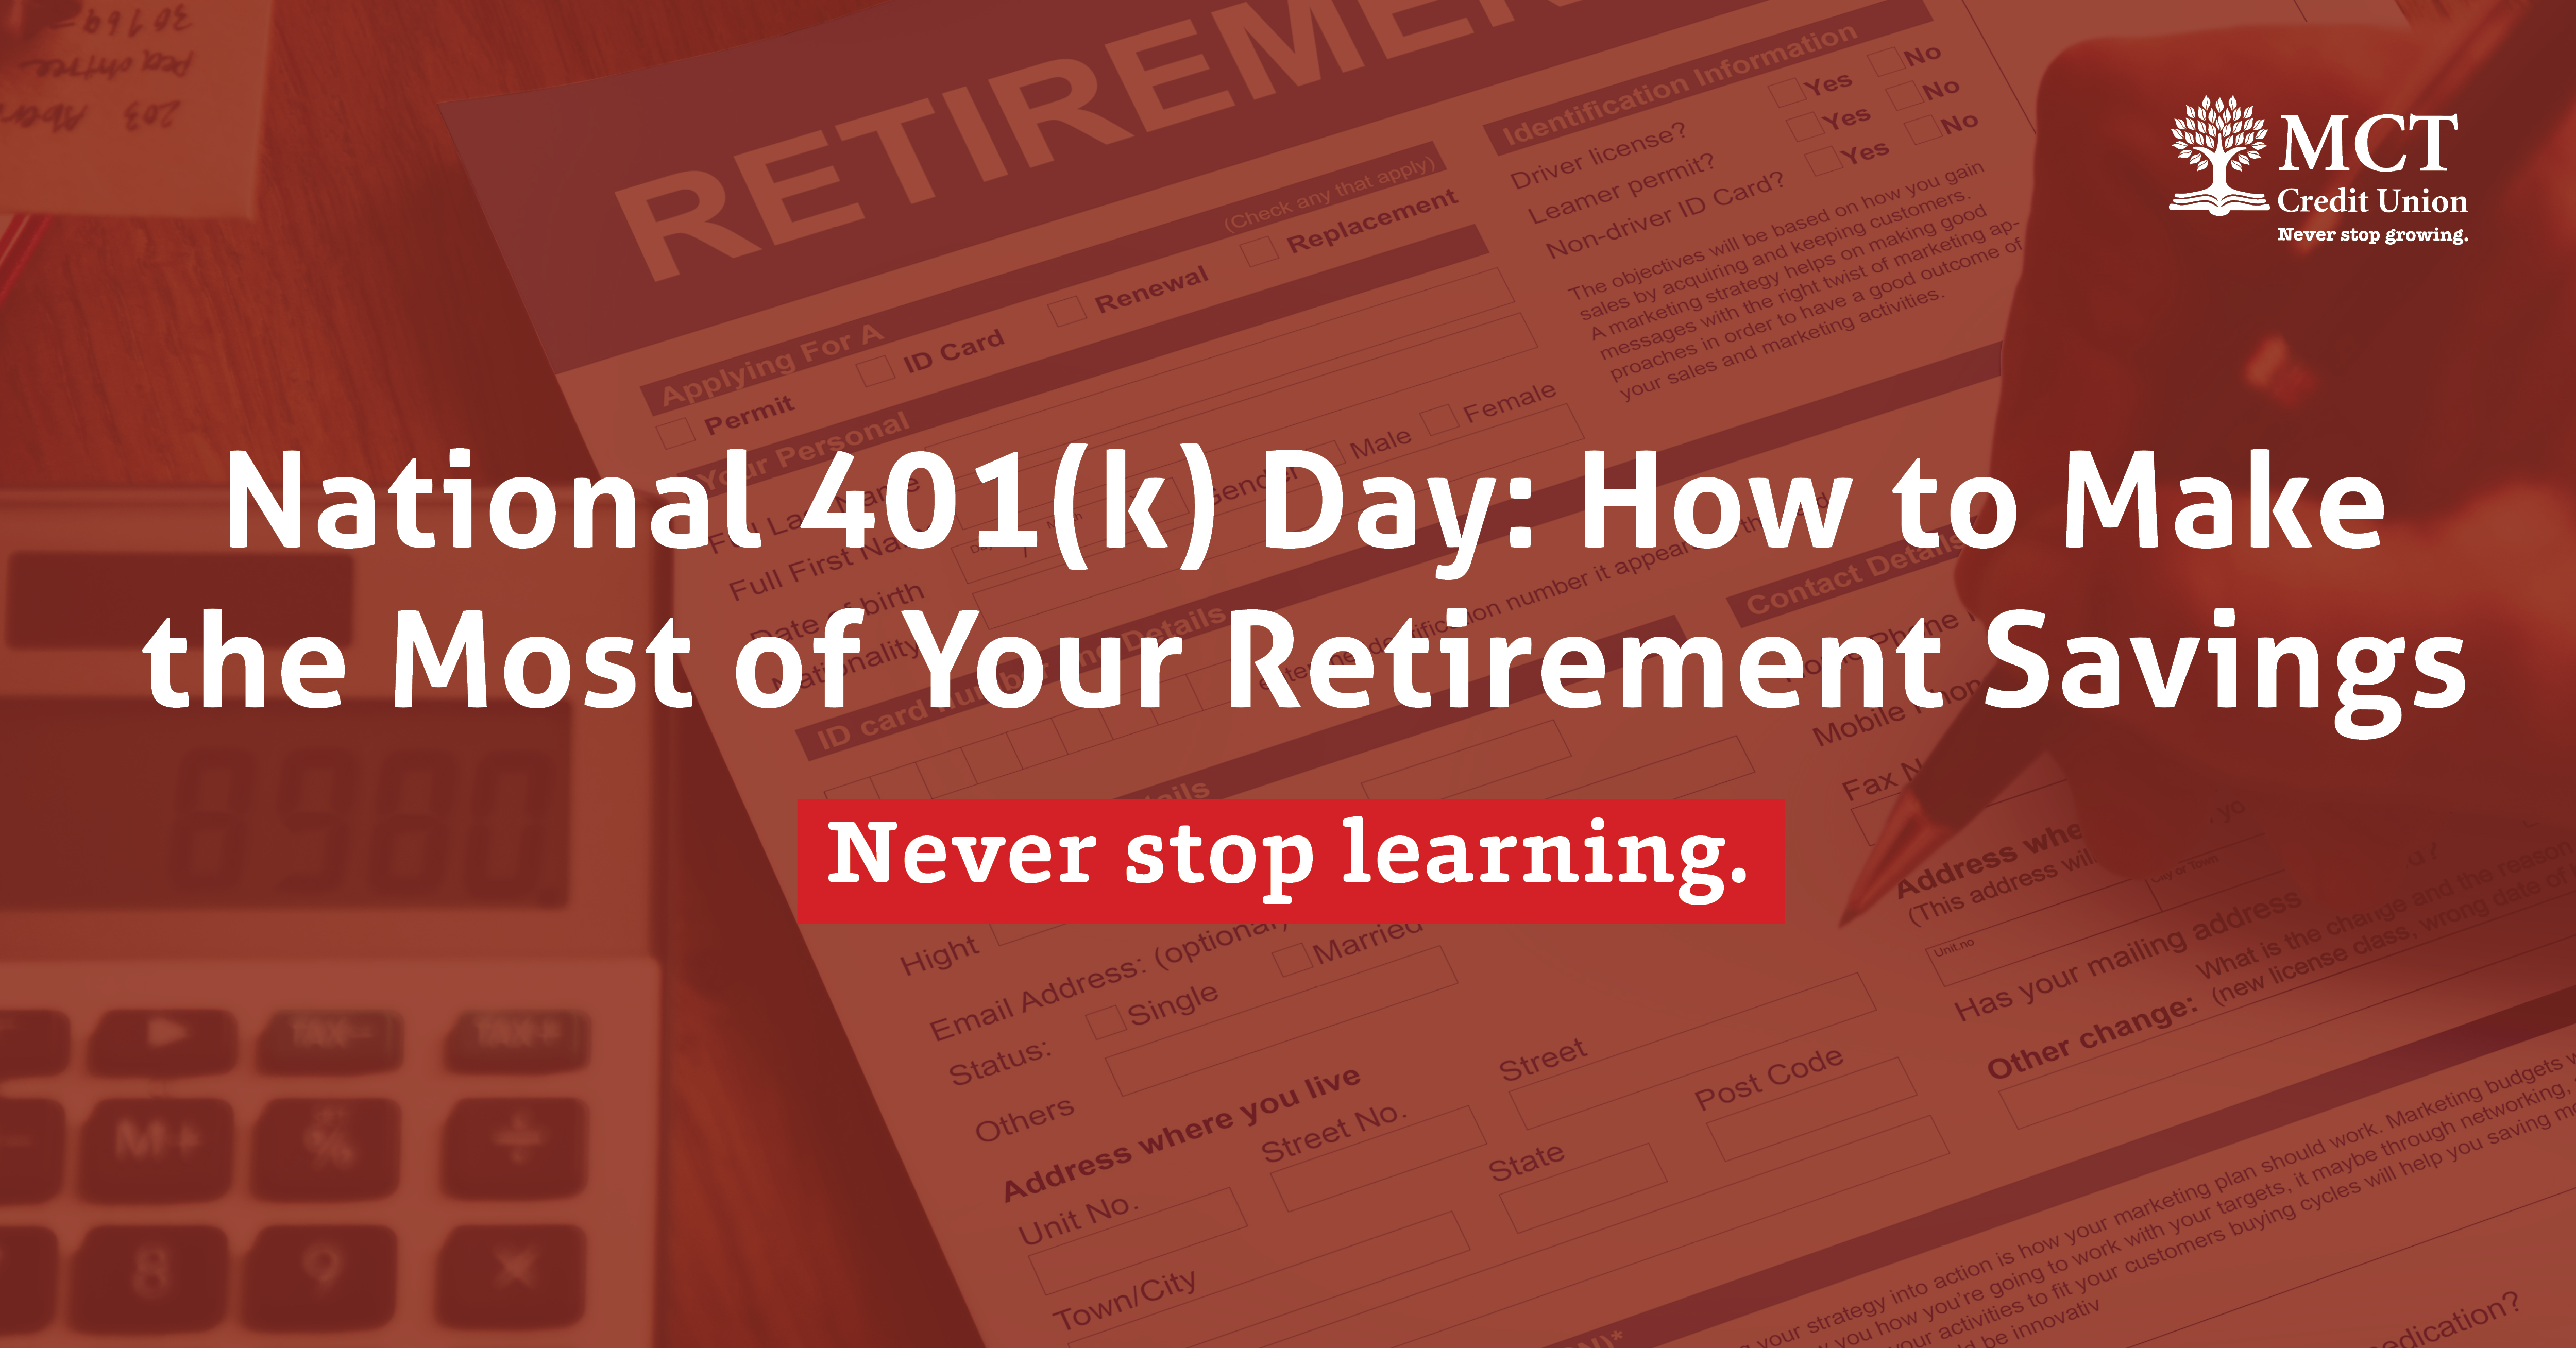 “National 401(k) Day: How to Make the Most of Your Retirement Savings”